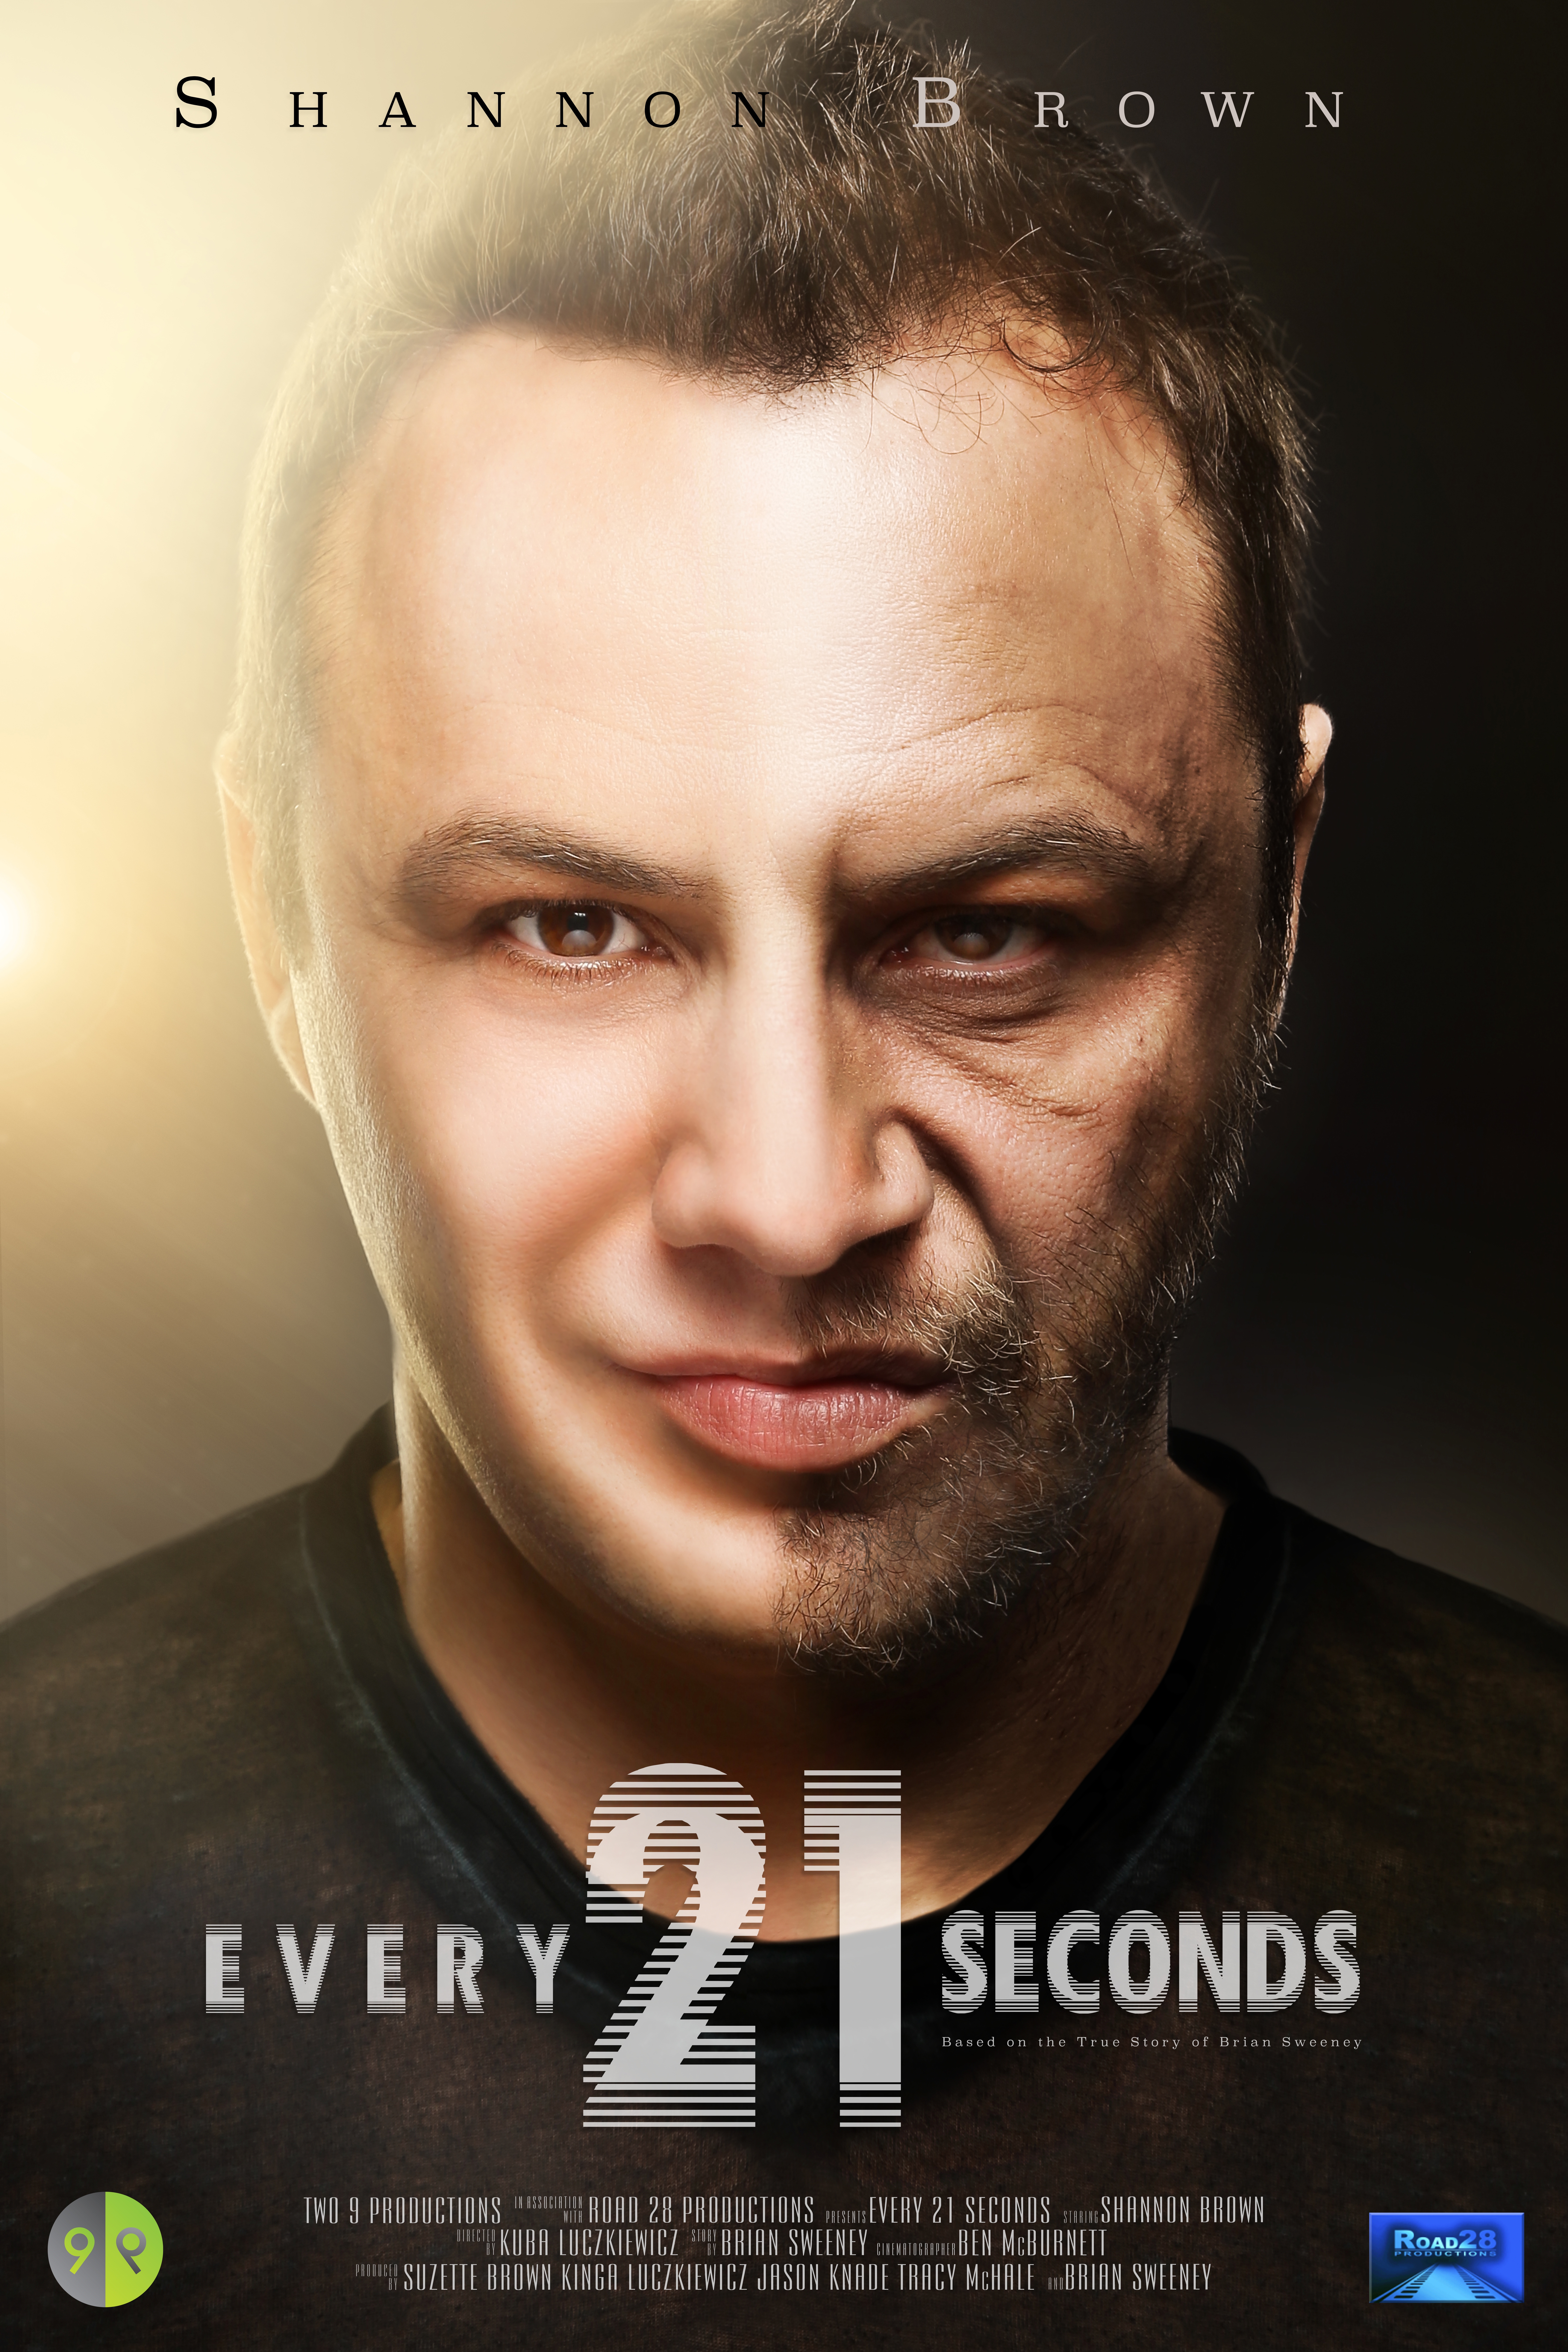 Official poster for the feature film, Every 21 Seconds. Based on the remarkable true story of TBI survivor, Brian Sweeney.